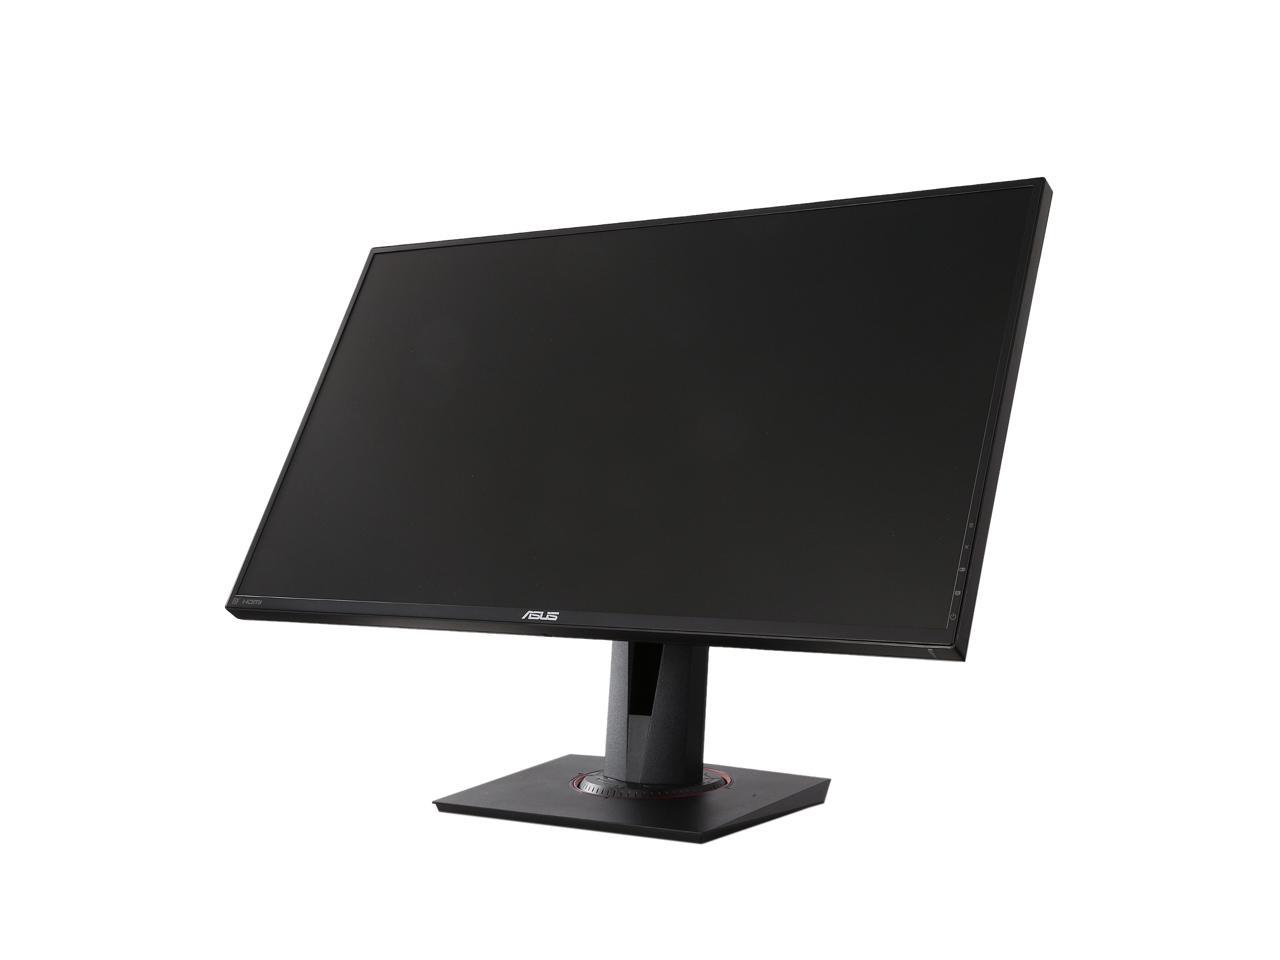 Refurbished Asus Vg278q 27 Full Hd 19x1080 1ms 144hz Hdmi Displayport Dvi D G Sync Compatible Freesync Supporte Built In Speakers Flicker Free Narrow Bezel Backlit Led Lcd Gaming Monitor Newegg Com